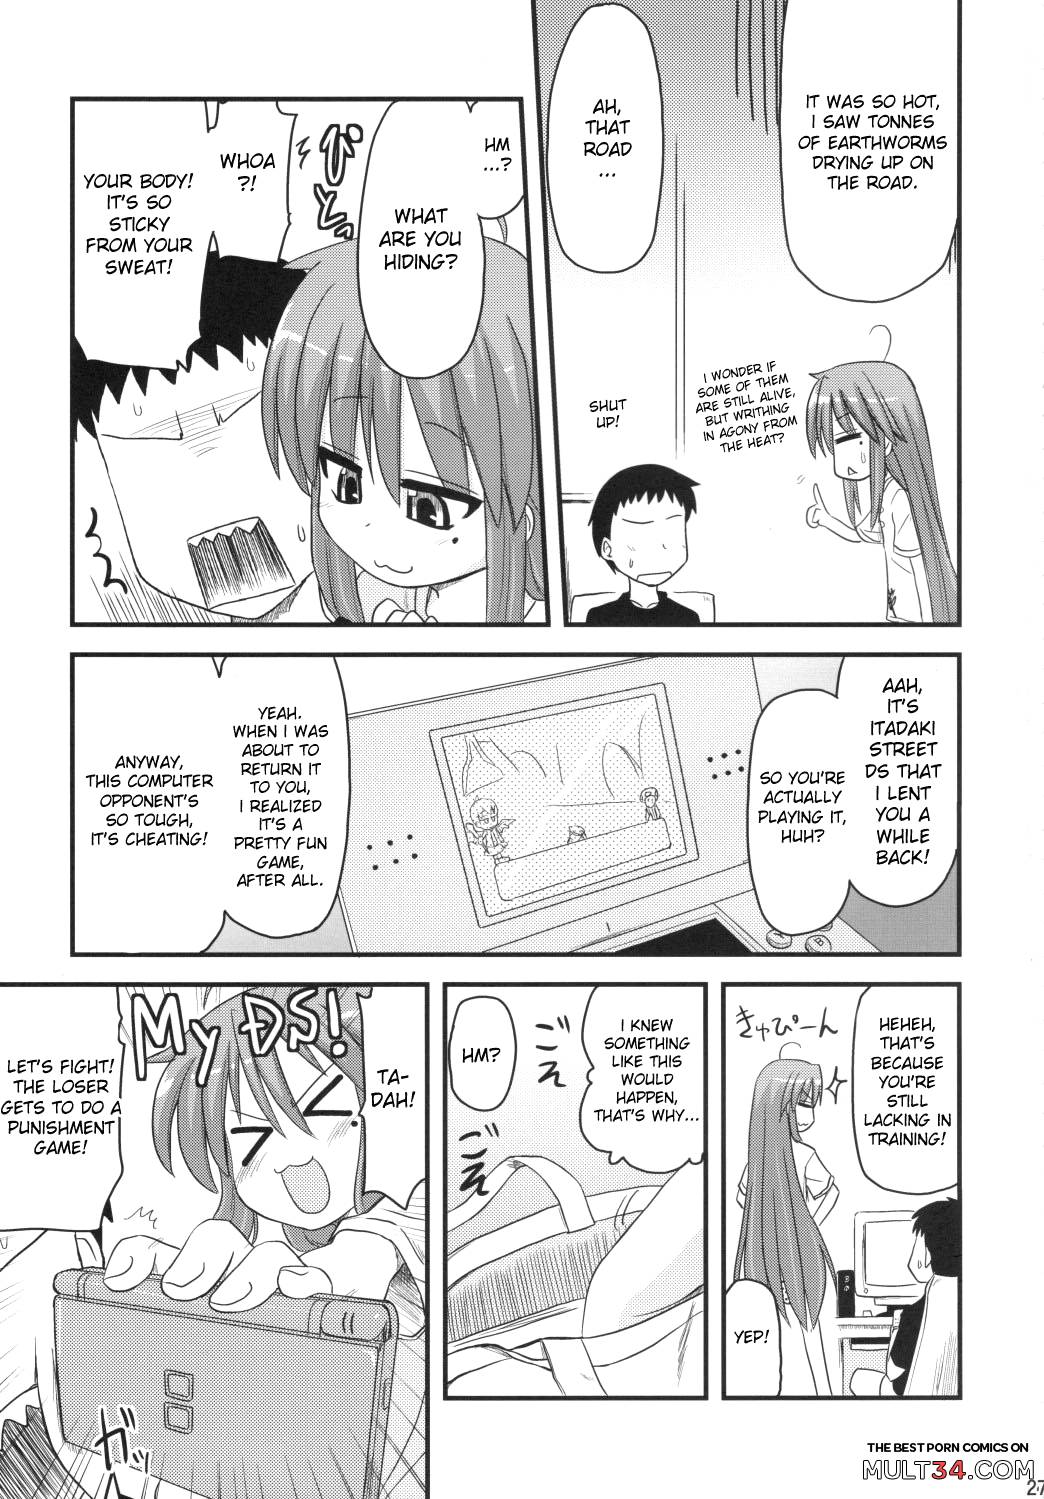 Konata and Oh-zu 4 people each and every one + 1 page 23